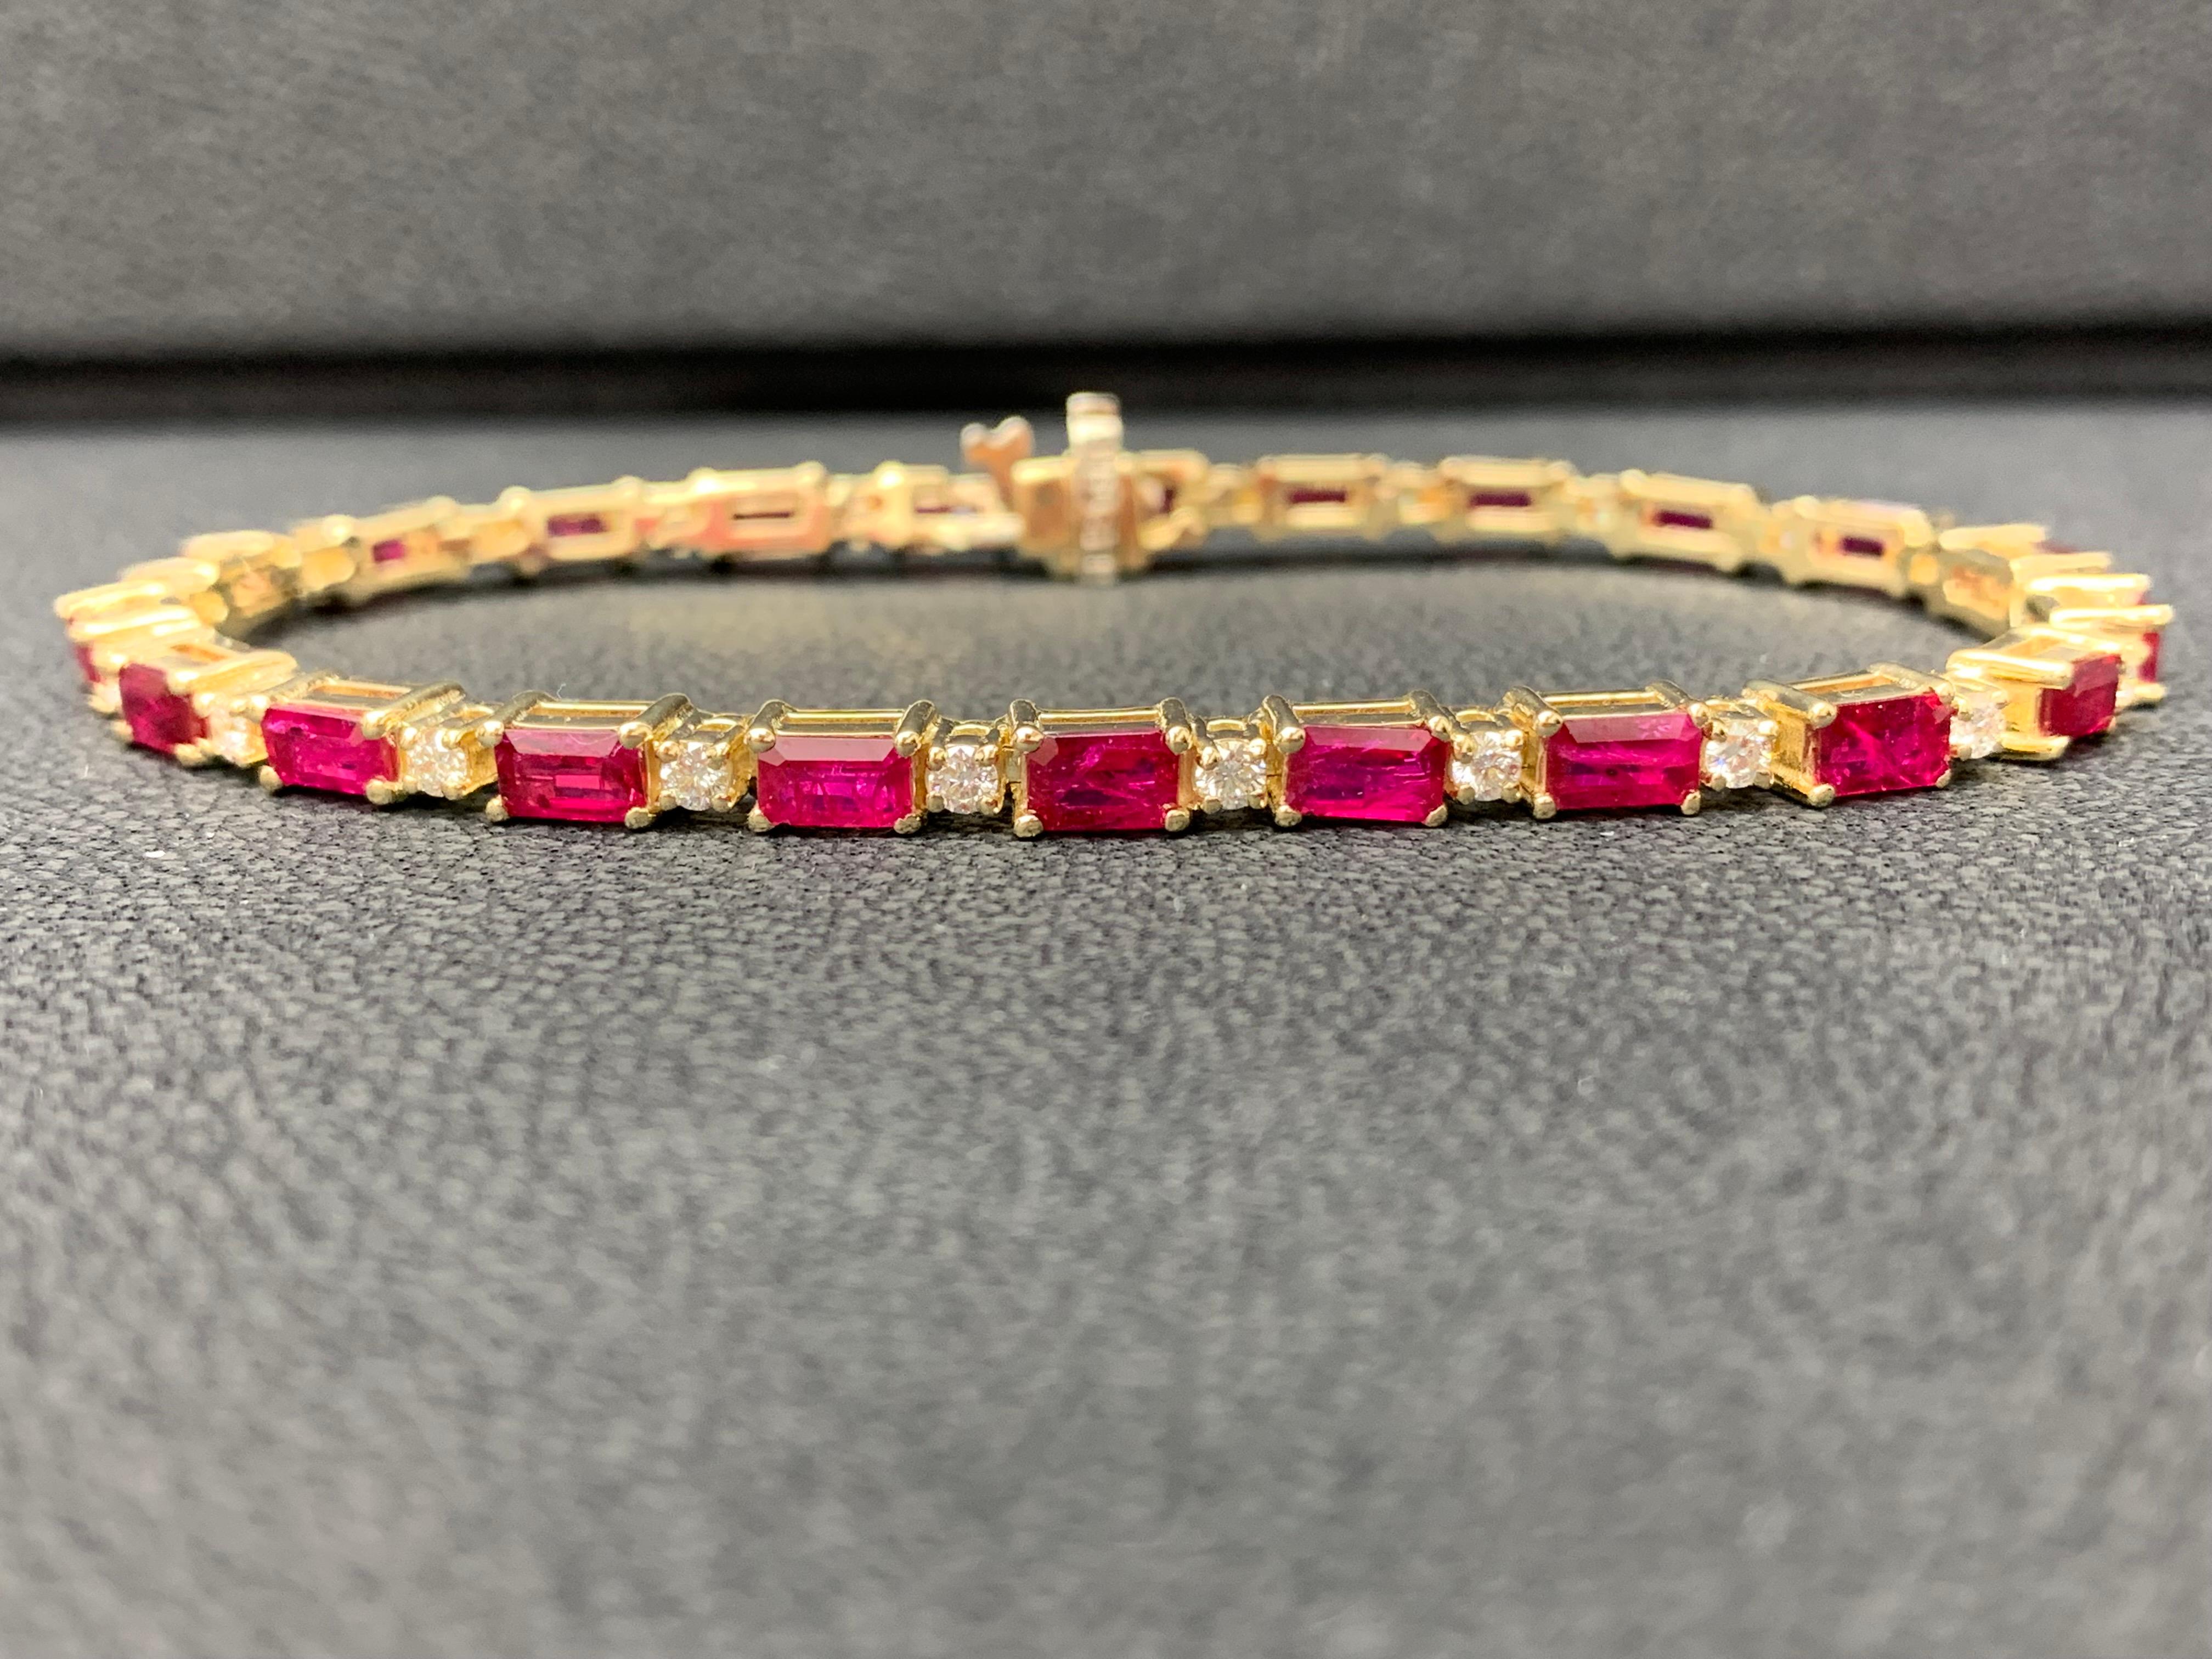 A fashionable tennis bracelet showcasing alternating emerald cut Lush 22 Rubies weighing 6.12 carats total and brilliant round 22 diamonds weighing 1 carat total. Set in a polished 14K Yellow Gold mounting. 

Style available in different price